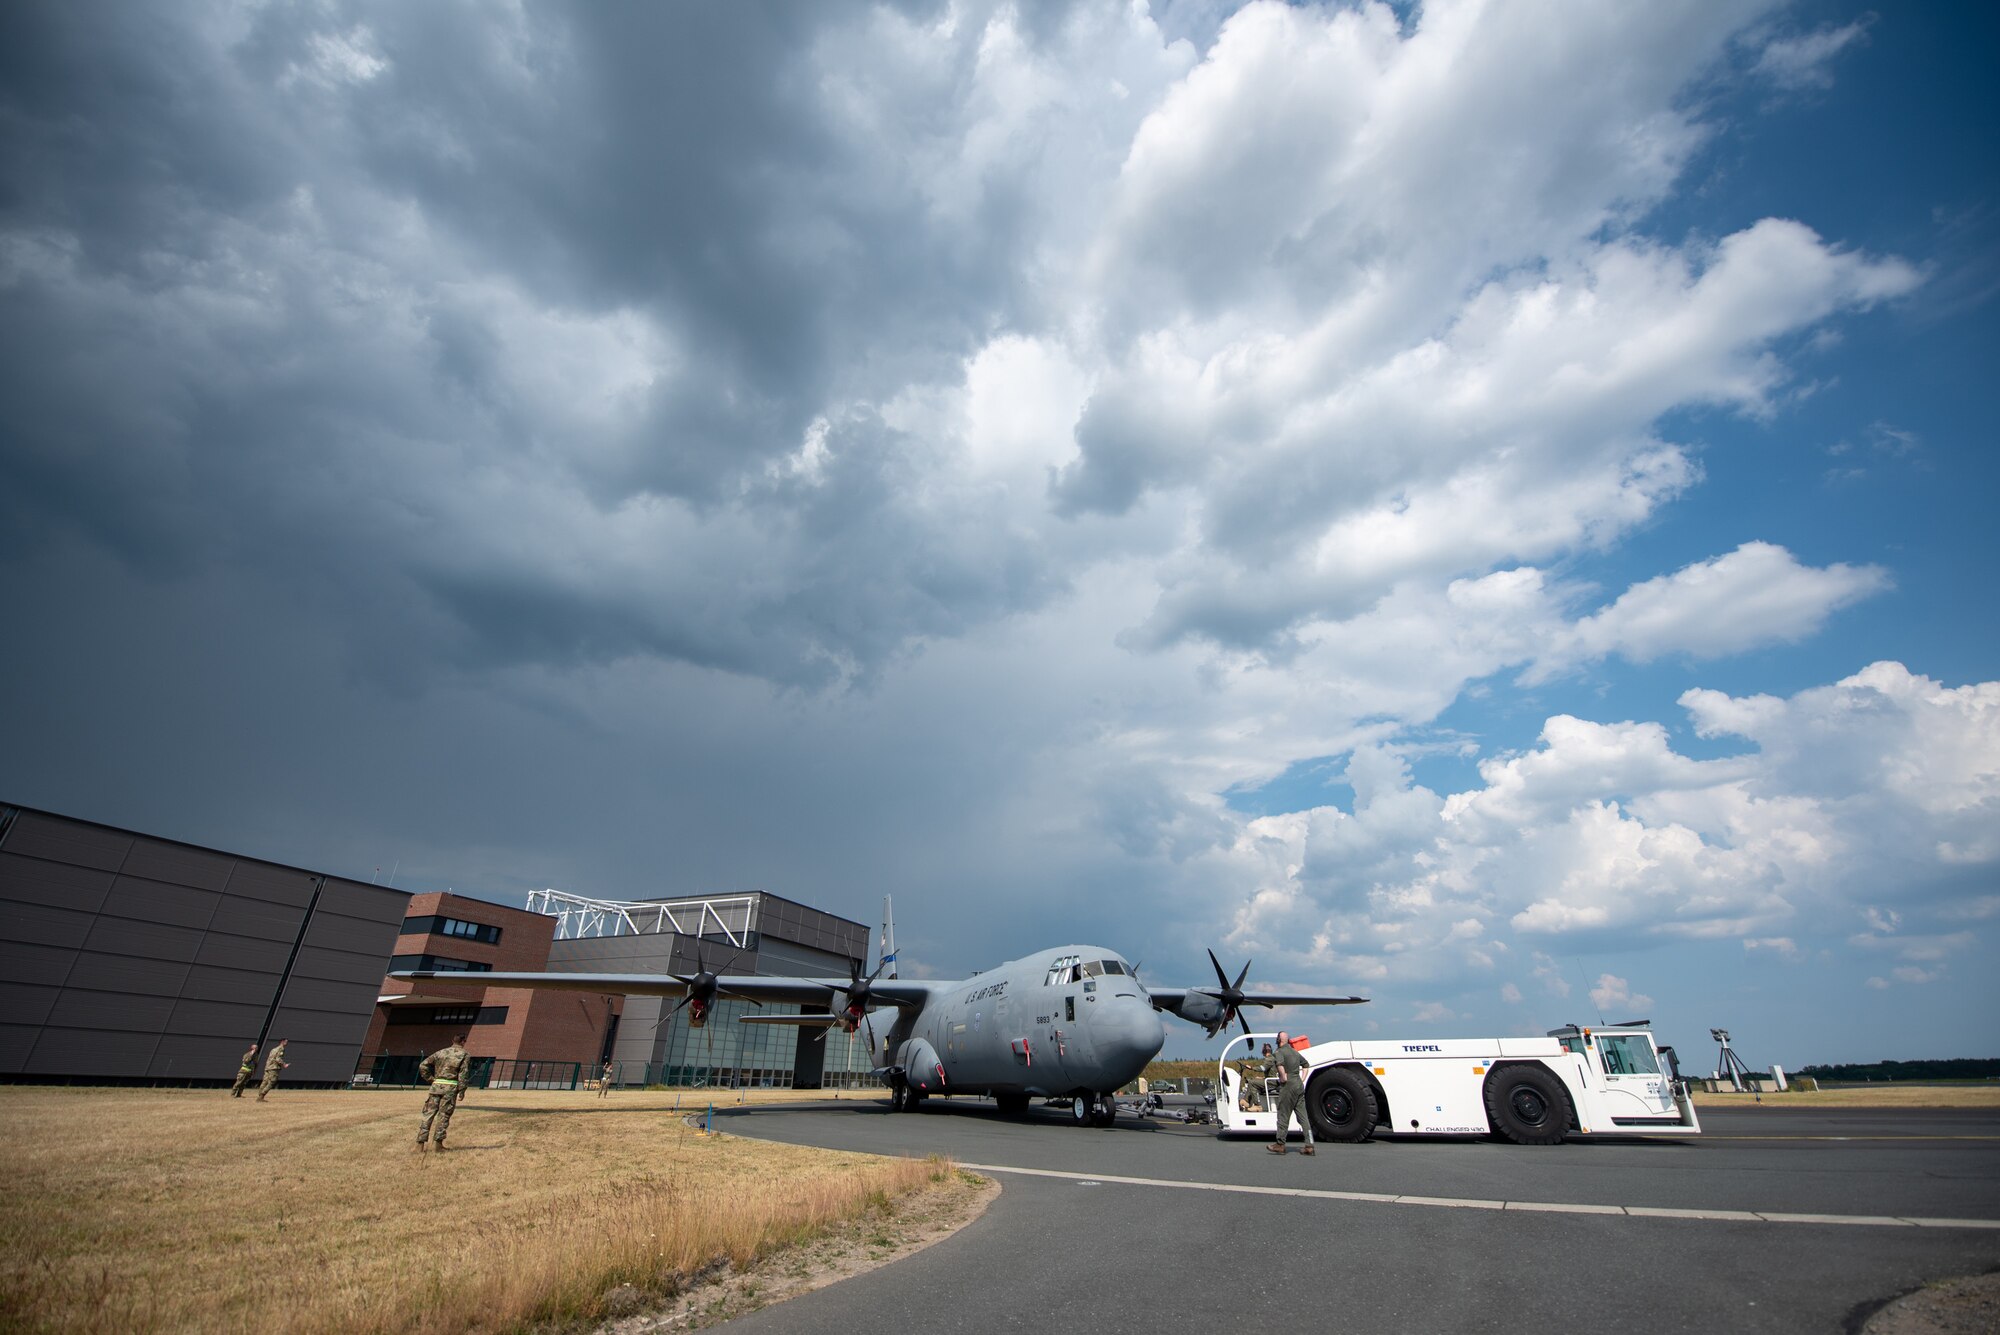 A C-130J Super Hercules assigned to the 123rd Airlift Wing, Kentucky National Guard, is towed by a German aircraft tug at Wunstorf Air Base, Wunstorf, Germany, June 12, 2023.  Exercise Air Defender integrates both U.S. and allied air-power to defend shared values, while leveraging and strengthening vital partnerships to deter aggression around the world. (U.S. Air National Guard photo by Master Sgt. Phil Speck)